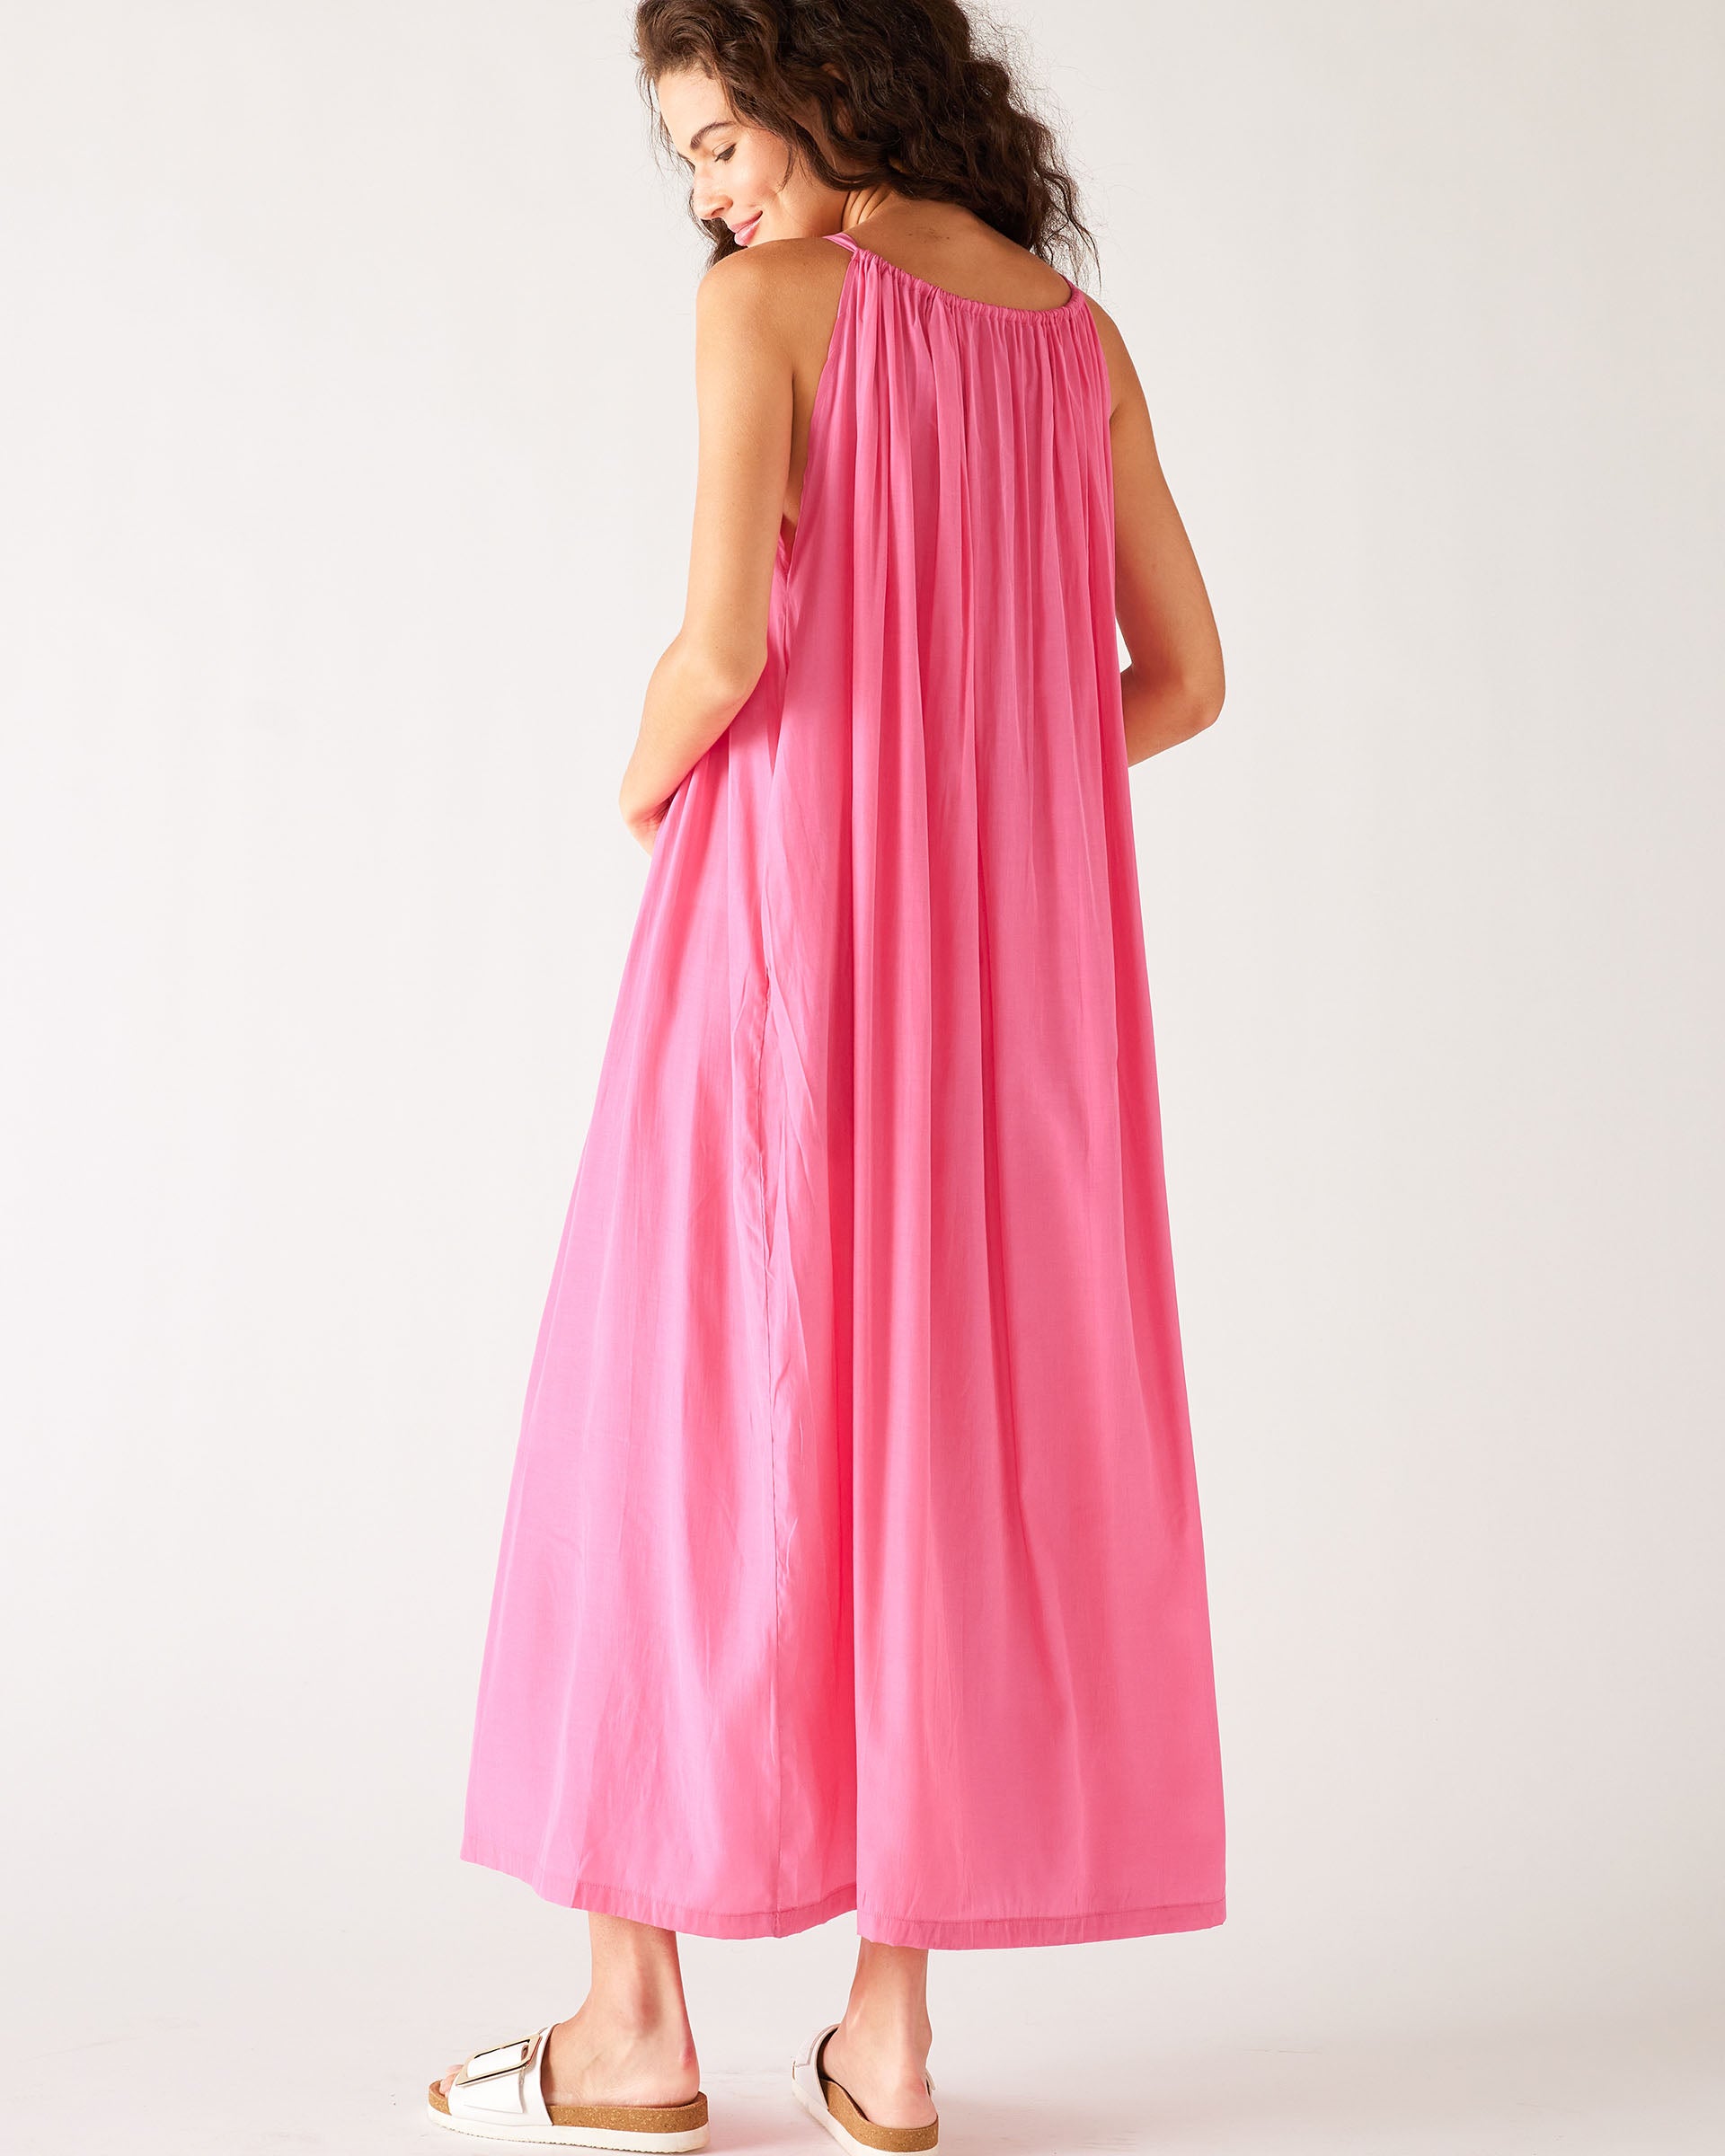 Women's Bright Pink Loose Fit Pullover Maxi Dress Full Body Rear View